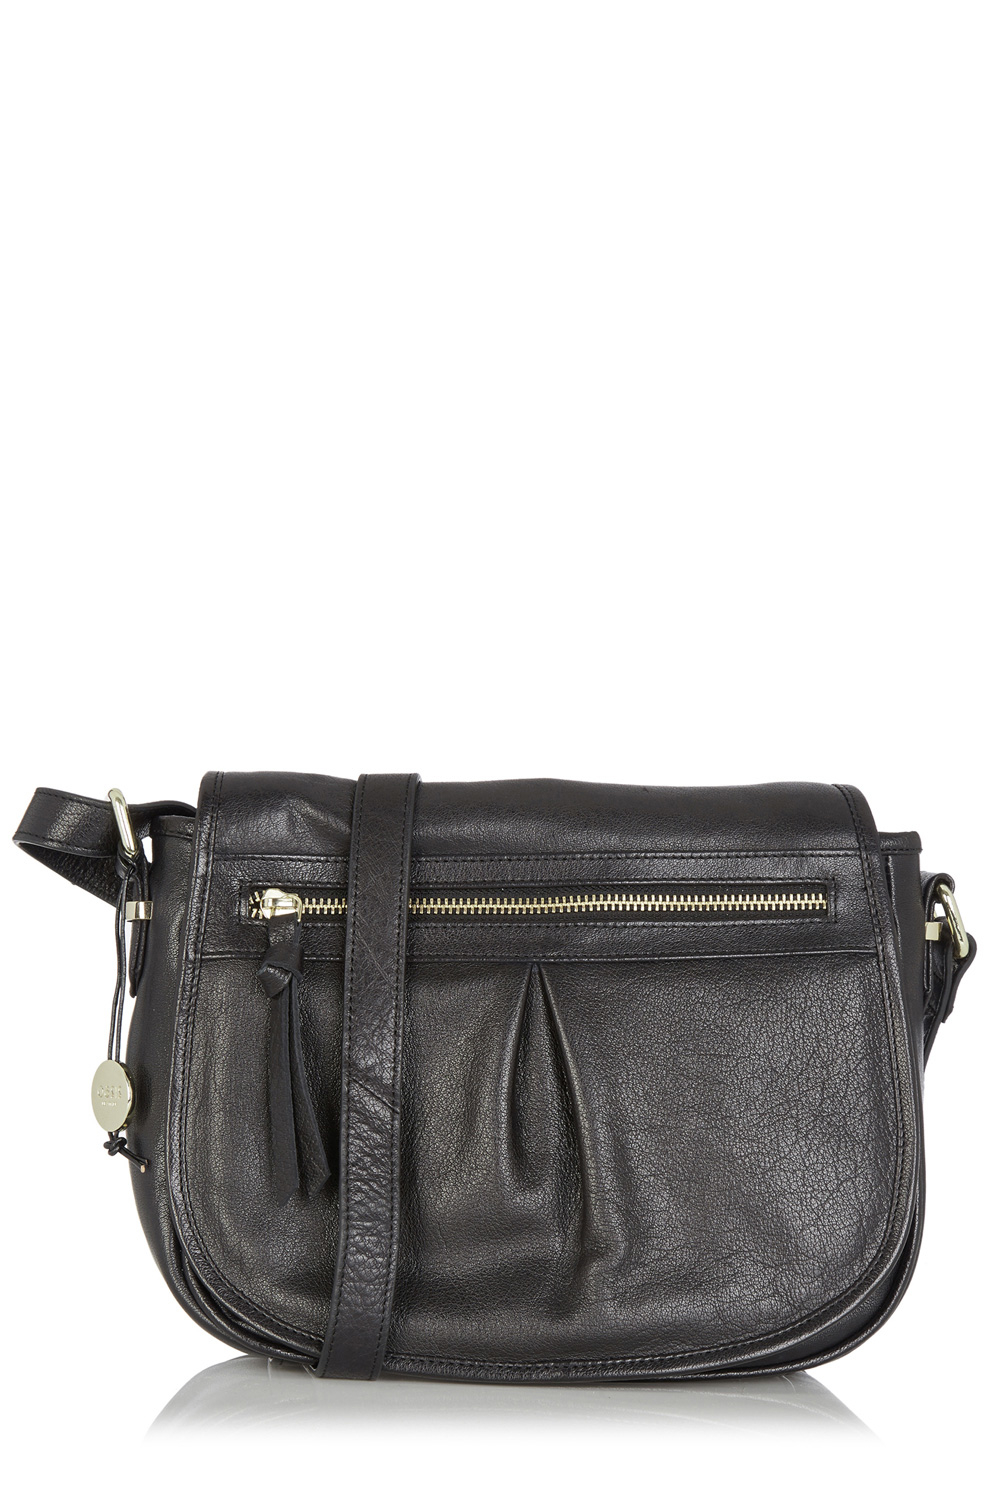 Oasis Tandy Leather Saddle Bag in Black | Lyst